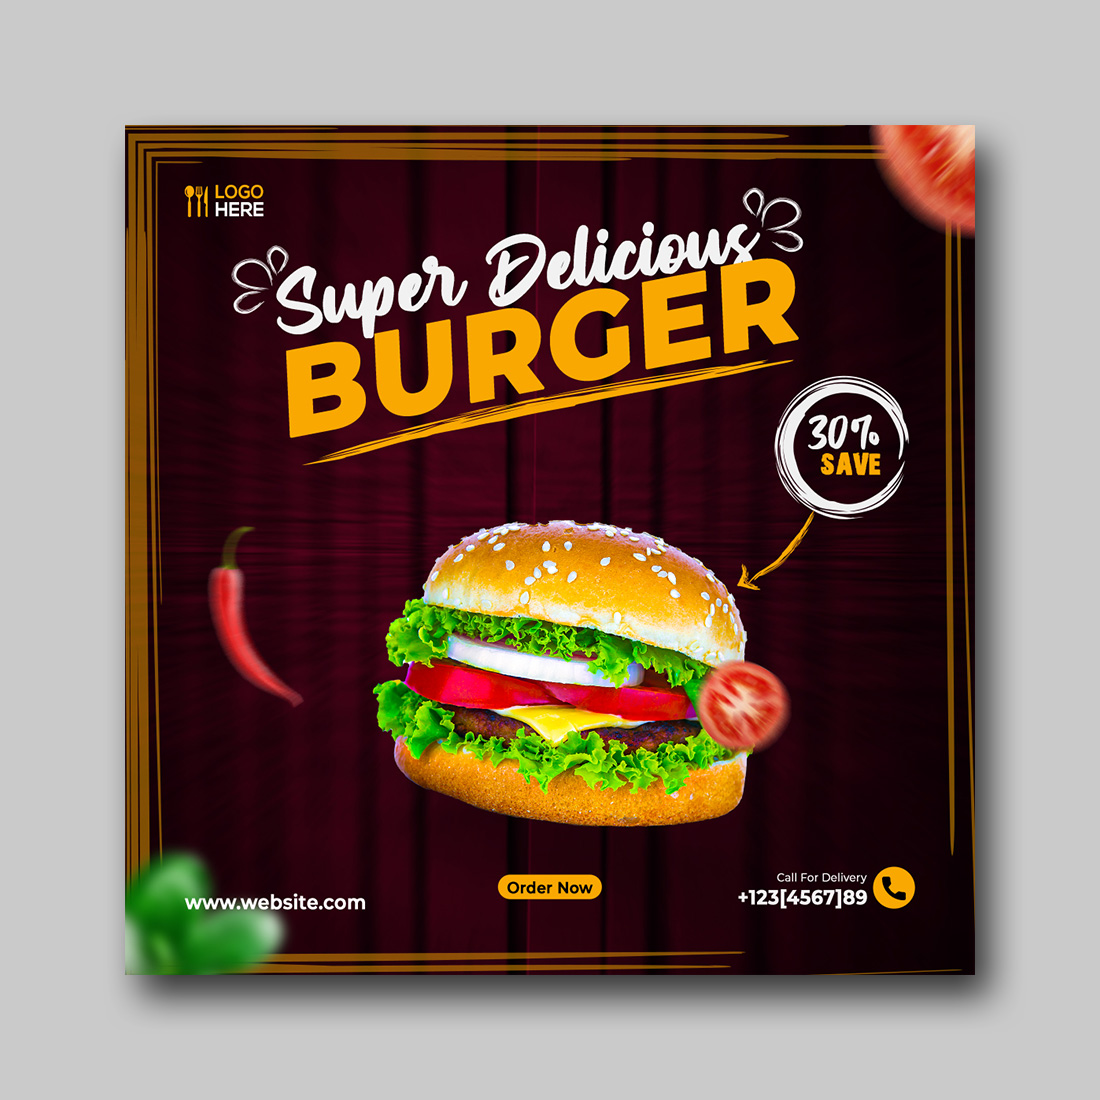 Instagram Post Food Template PSD cover image.